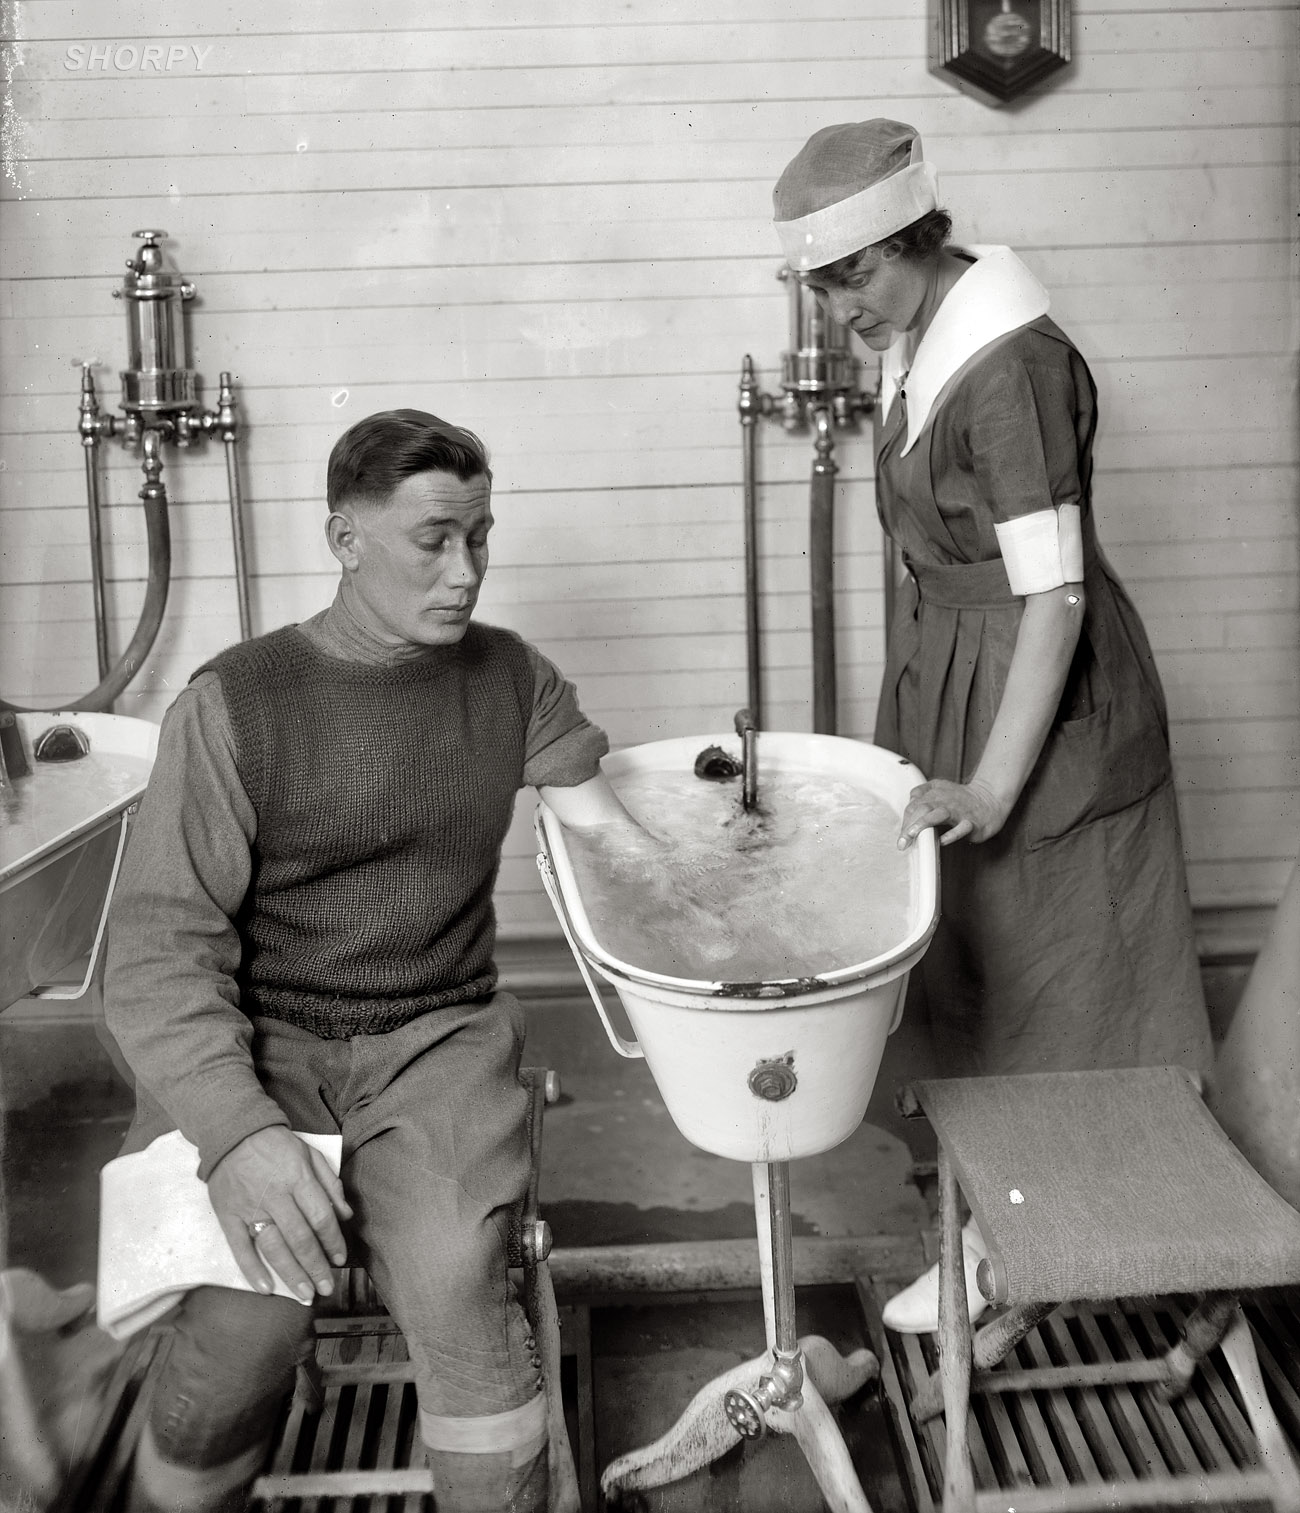 Washington circa 1920. "Walter Reed physiotherapy story." View full size. National Photo Company Collection glass negative, Library of Congress.